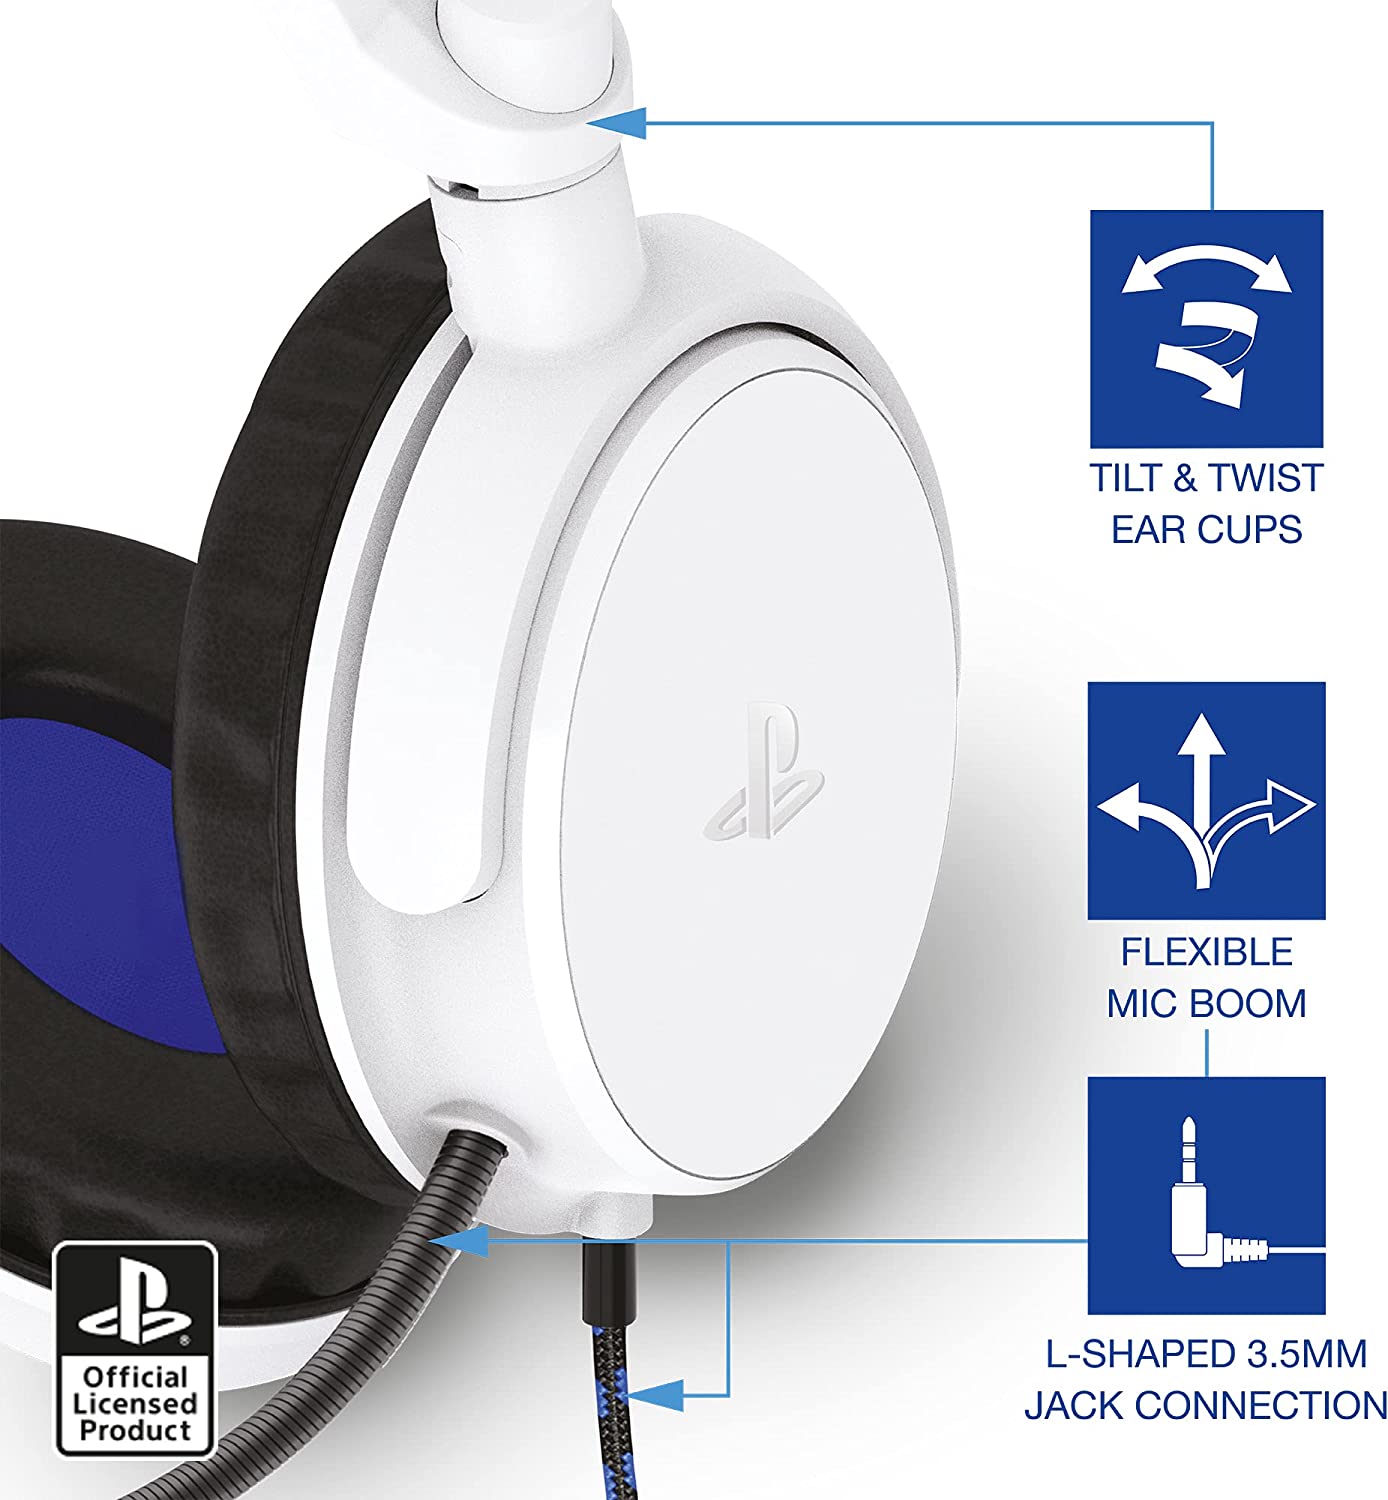 4Gamers PRO4-50s Stereo Gaming Headset - White (PS4)